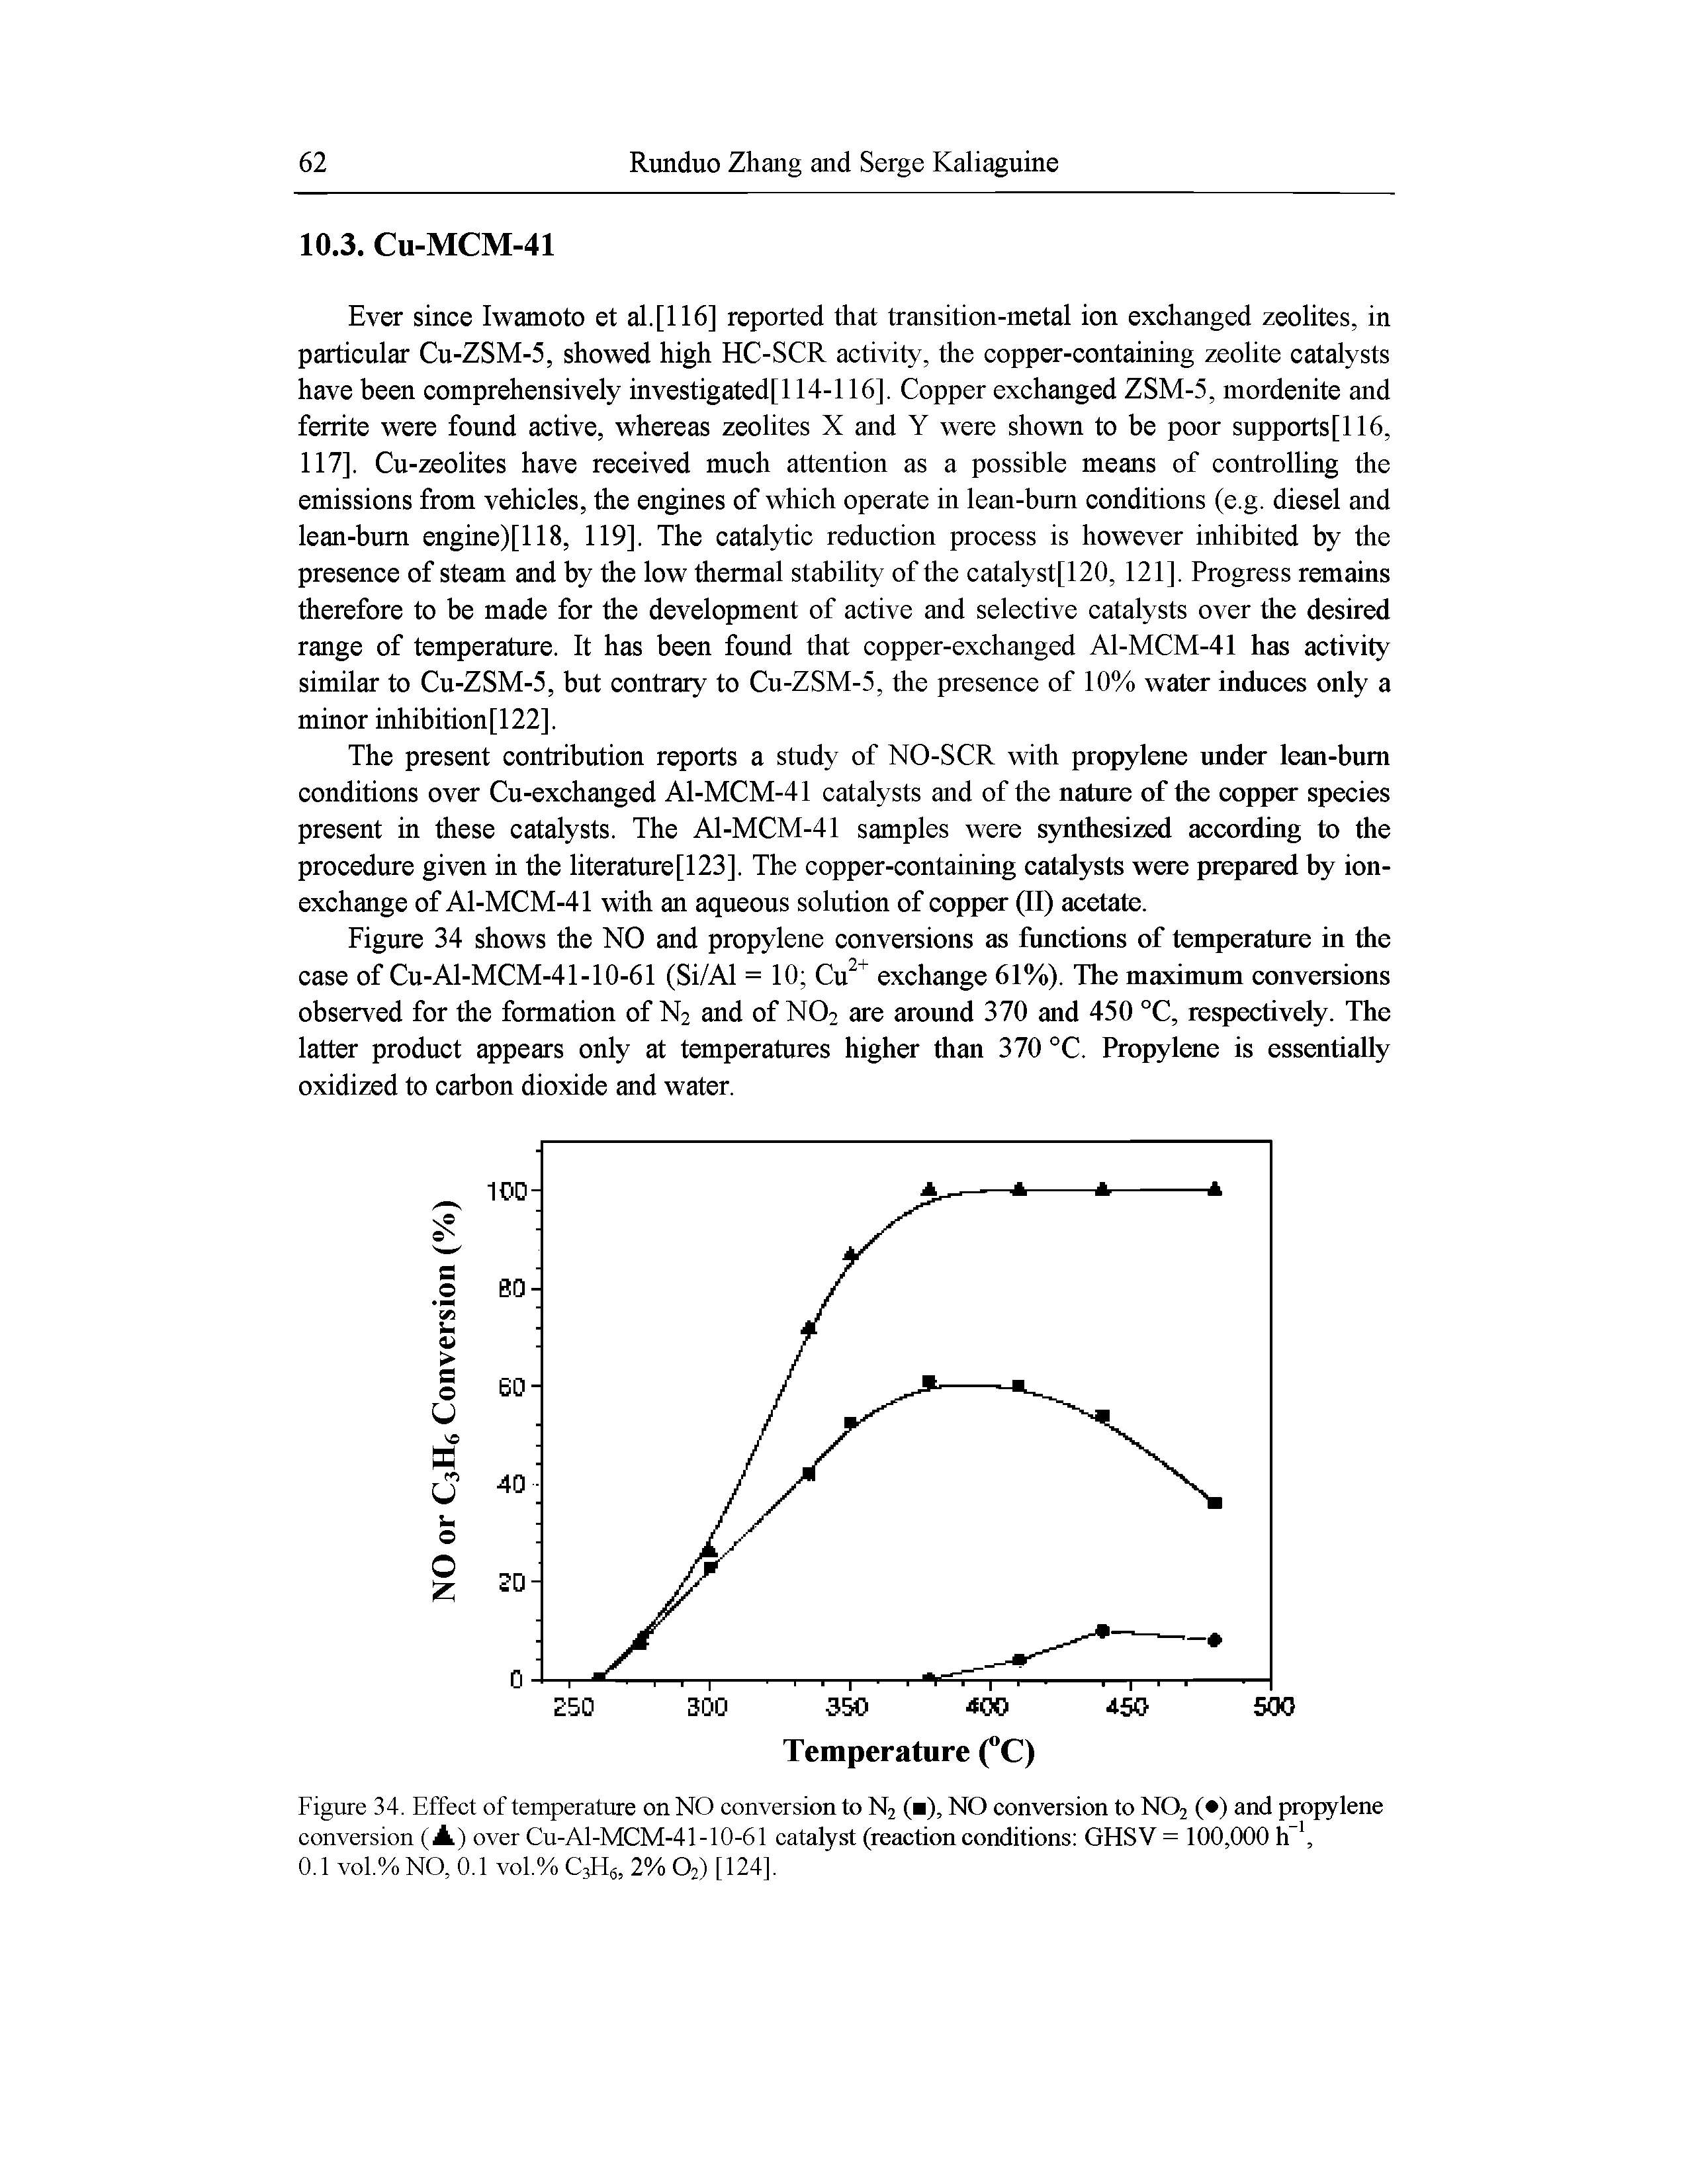 Figure 34. Effect of temperature on NO conversion to N2 ( ), NO conversion to NO2 ( ) and propylene conversion (A) over Cu-Al-MCM-41-10-61 catalyst (reaction conditions GHSV = 100,000 h, ...